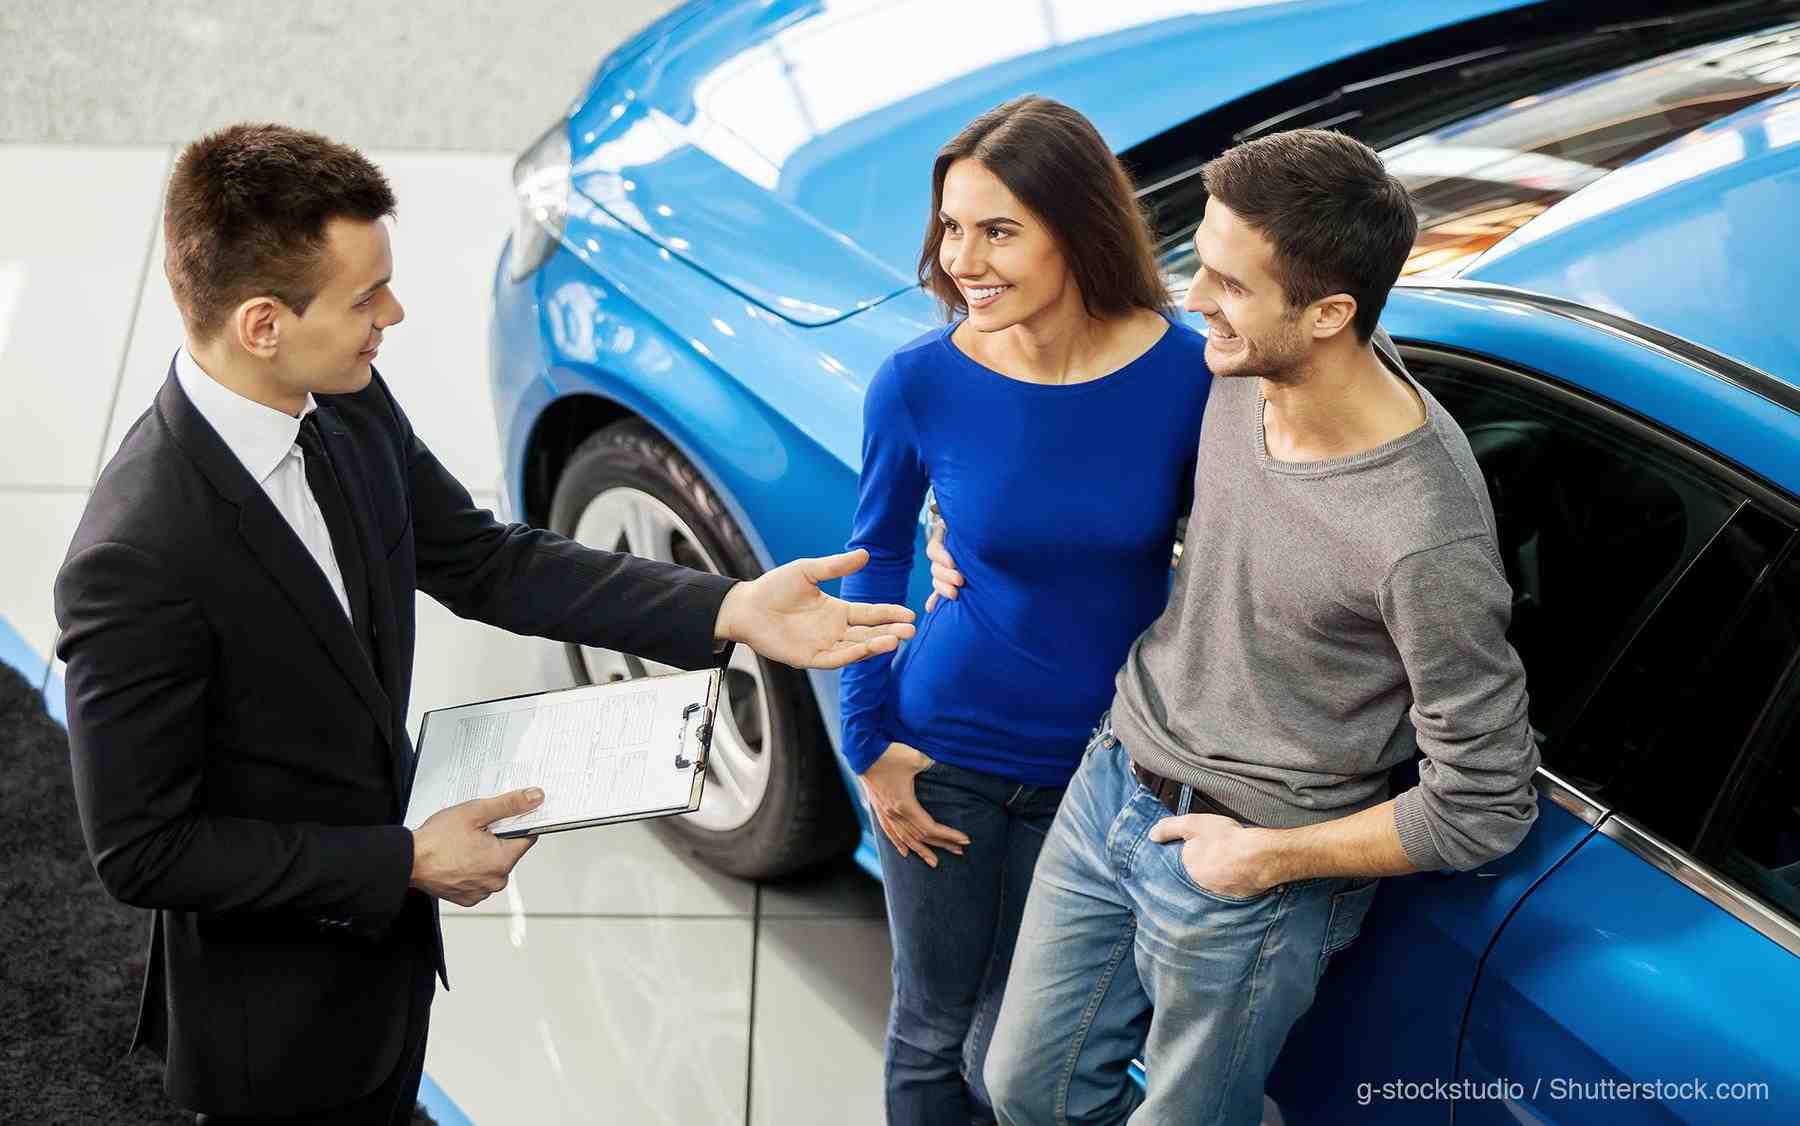 The Southern California dealership offers valuable car purchase incentives